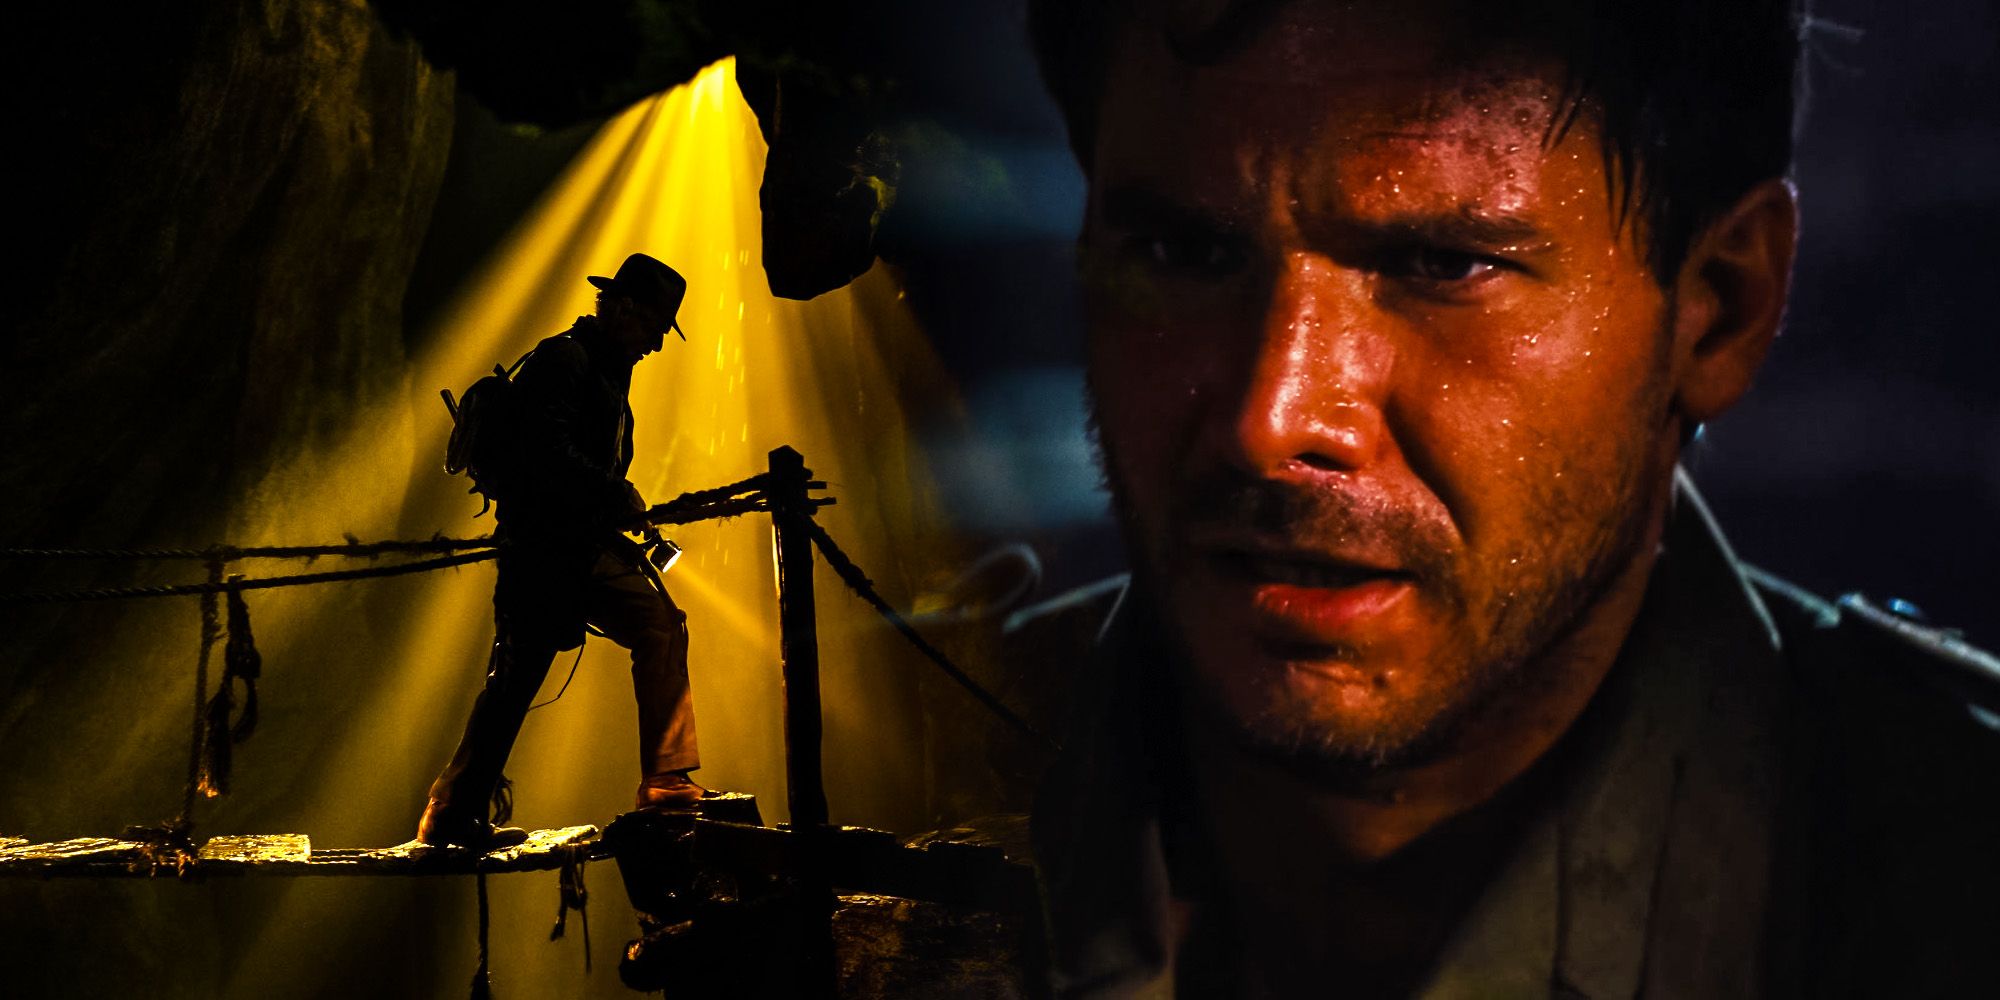 Indiana Jones 5 is a continuation of The Crystal Skull, The Independent